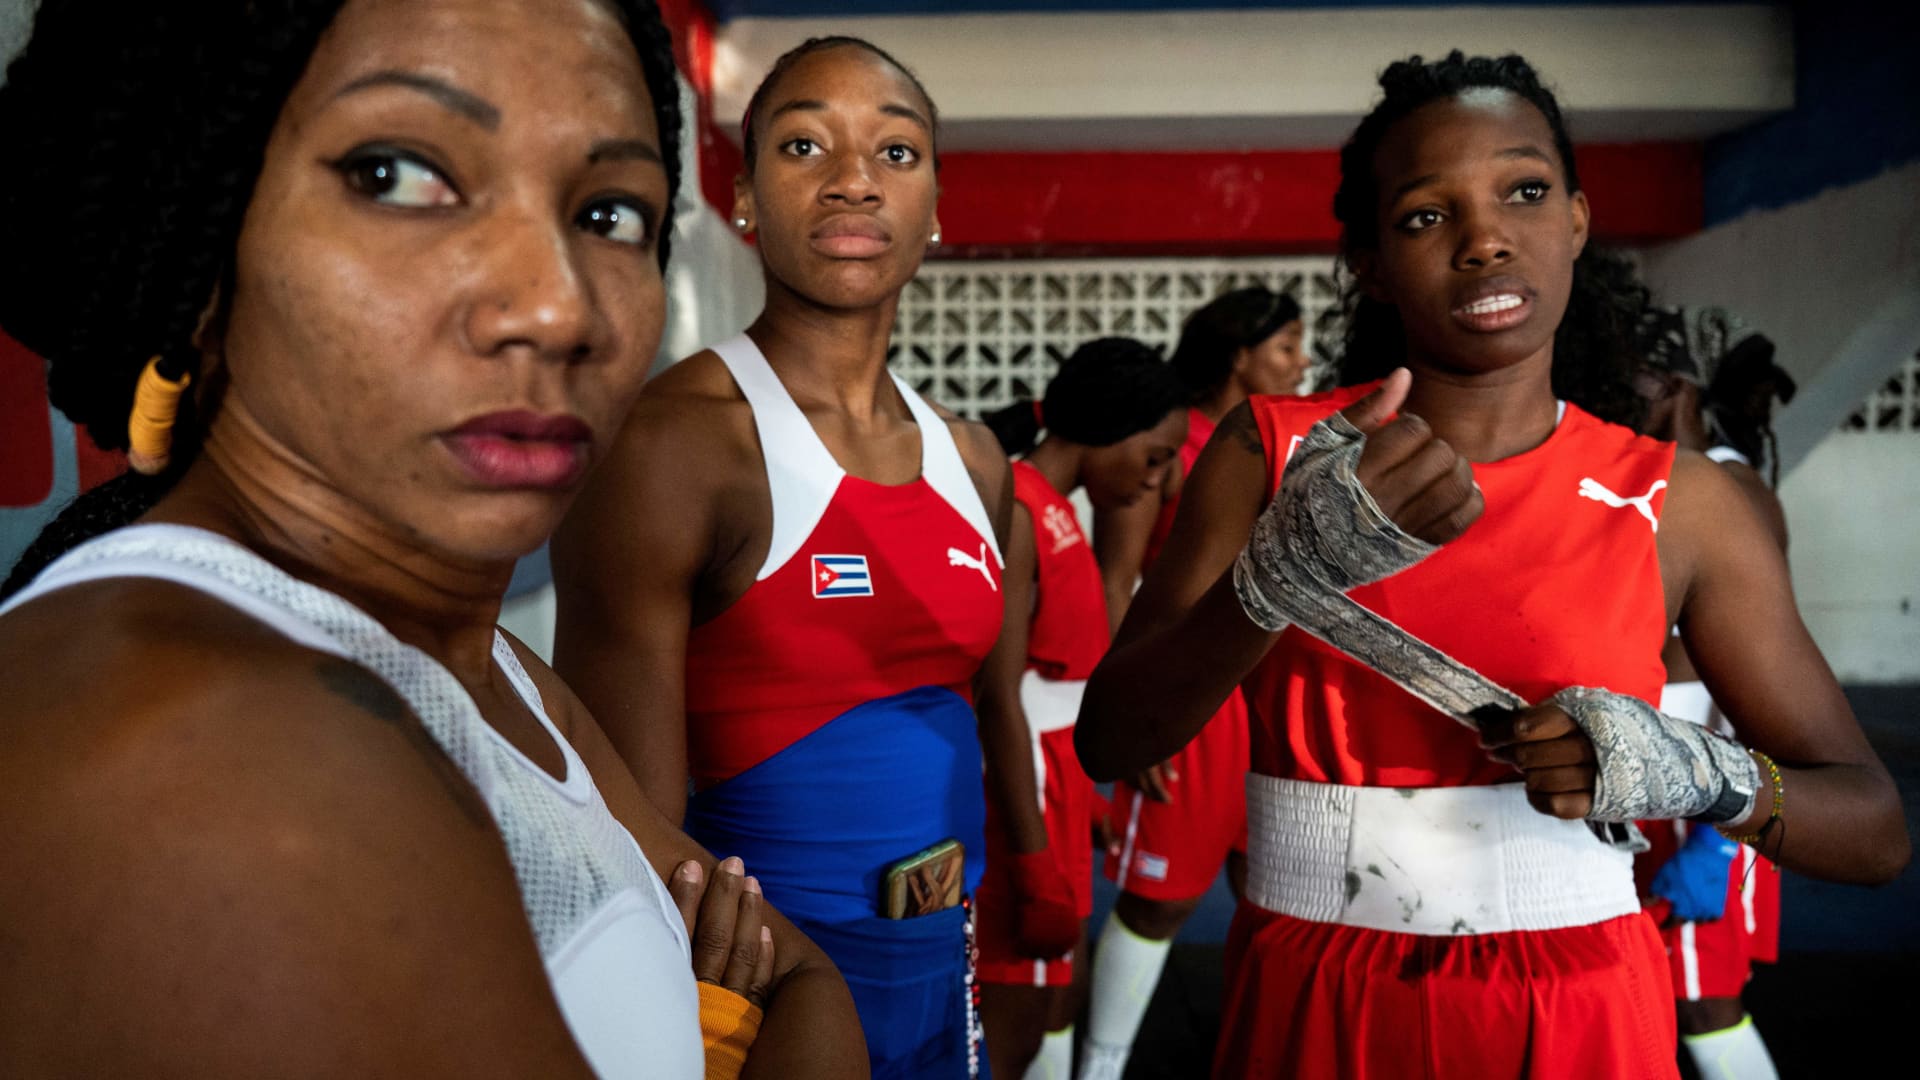 Cuban boxers prepare for their fights in the first official women's boxing program in Cuba at the Giraldo Cordova boxing school in Havana, on December 17, 2022.